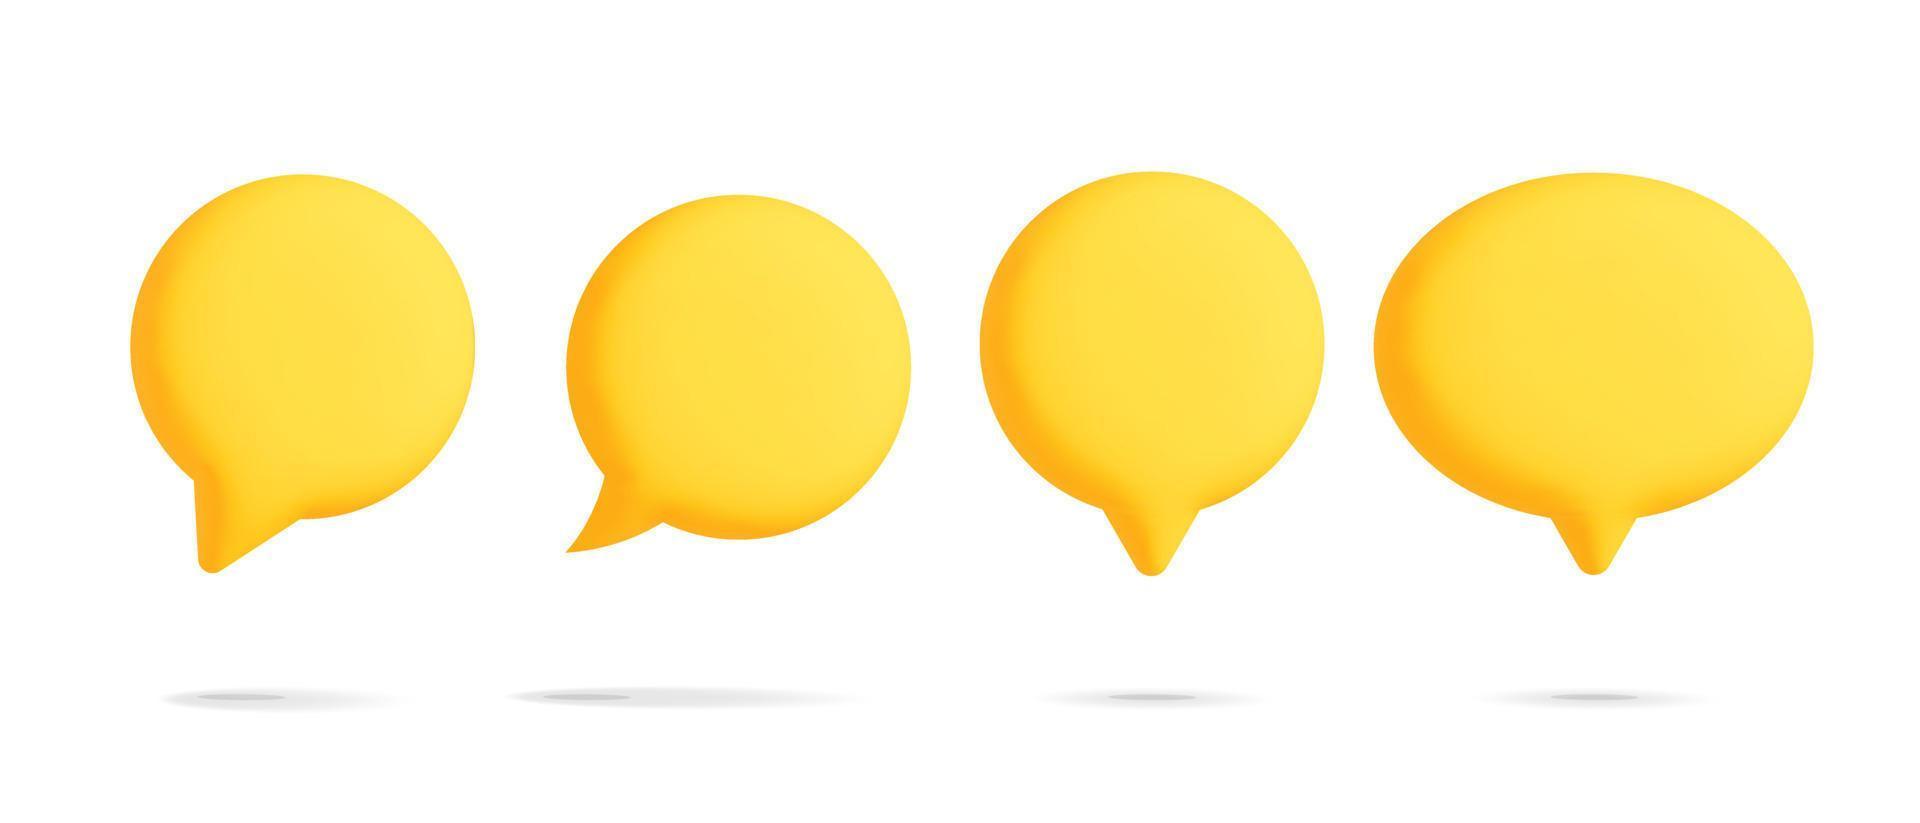 Set of 3d vector realistic render yellow round speech bubble balloon in different shape design